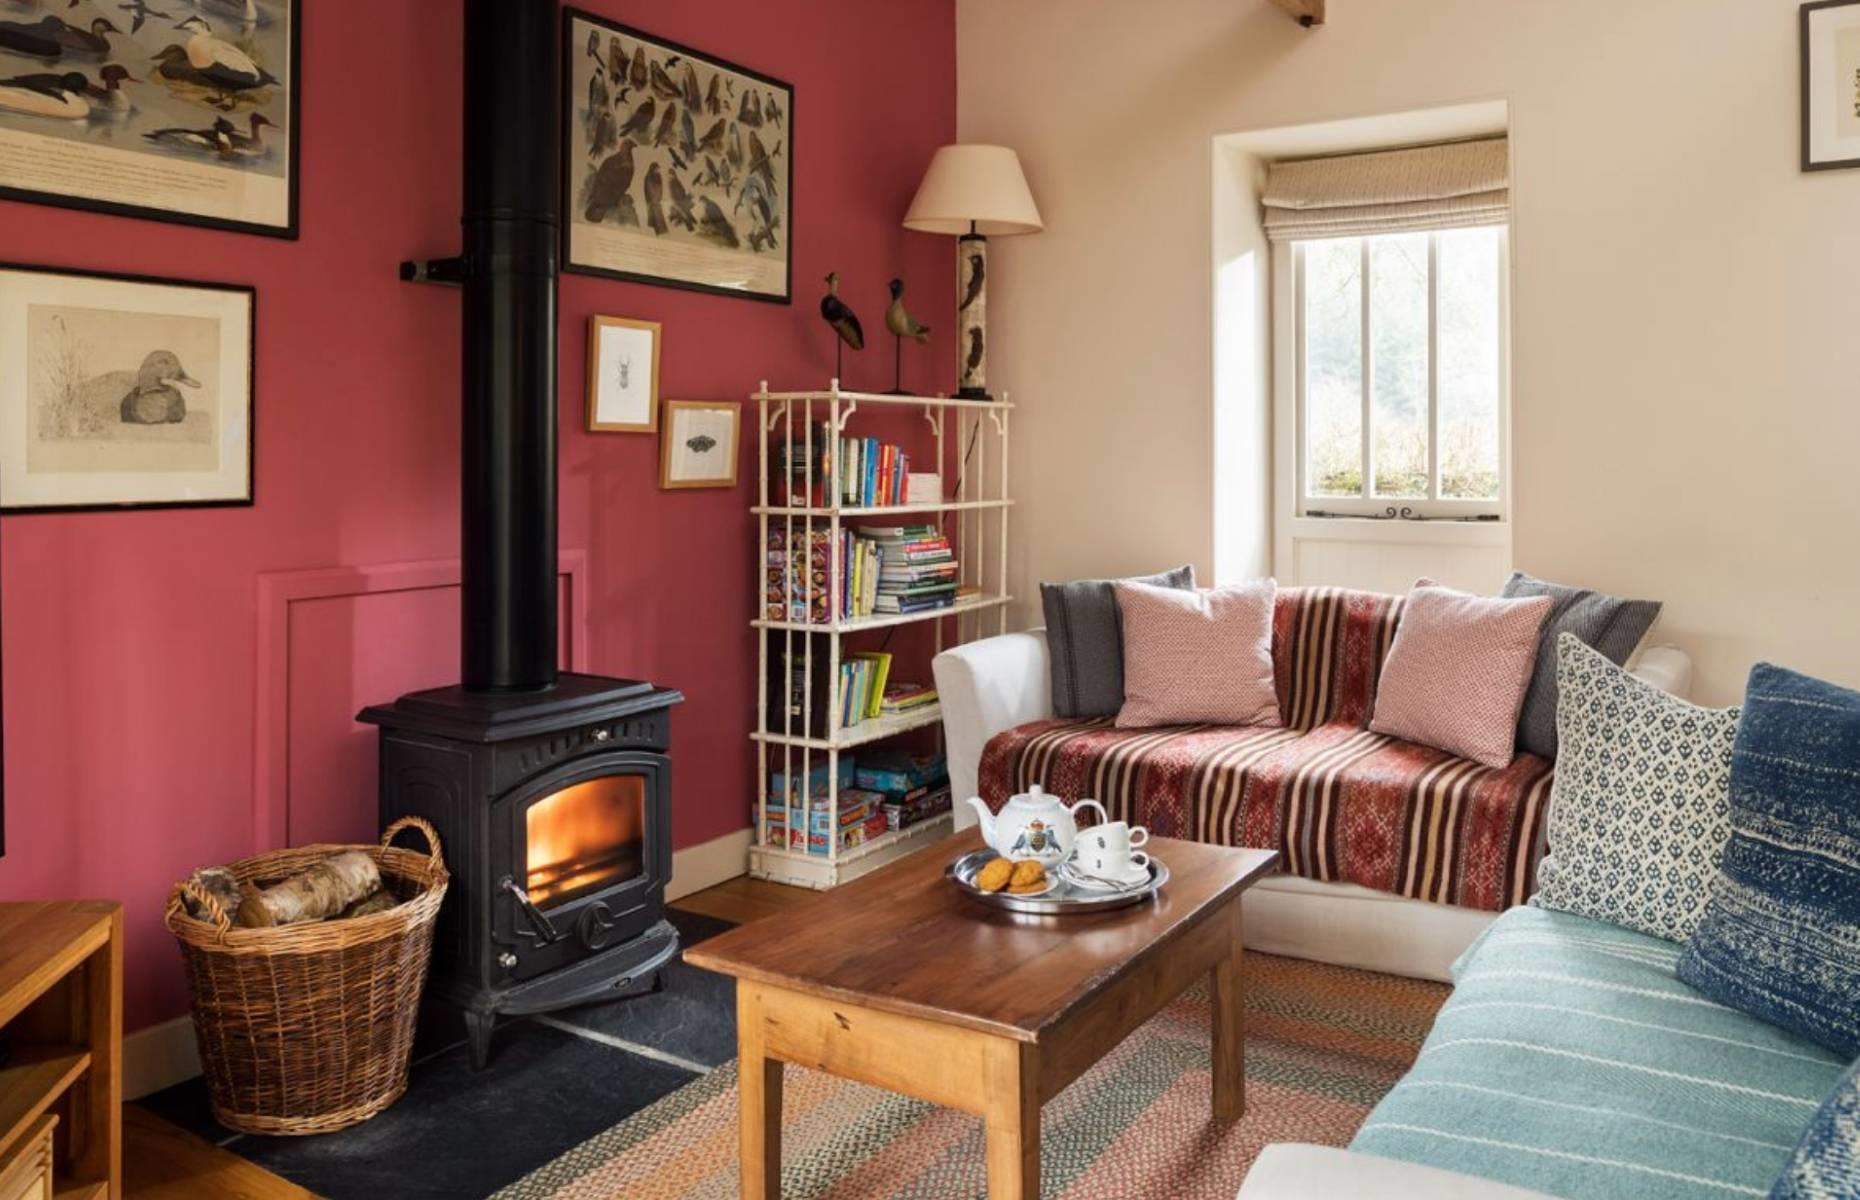 <p>The cottage has an open-plan sitting room/dining kitchen with a wood burner and stylish comfortable furniture as well as a king-size double bedroom on the first floor with views of Restormel Castle atop its Norman mound.</p>  <p>Best of all though is that it's great value for money. <a href="https://www.mirror.co.uk/news/royals/prince-williams-luxury-holiday-cottages-30584467">Reports</a> last year said cottages were cheaper than the price of a budget hotel, and a week in early July is available for around <a href="https://www.duchyofcornwallholidaycottages.co.uk/properties/diggery">£1,755 ($2.3k)</a>.</p>